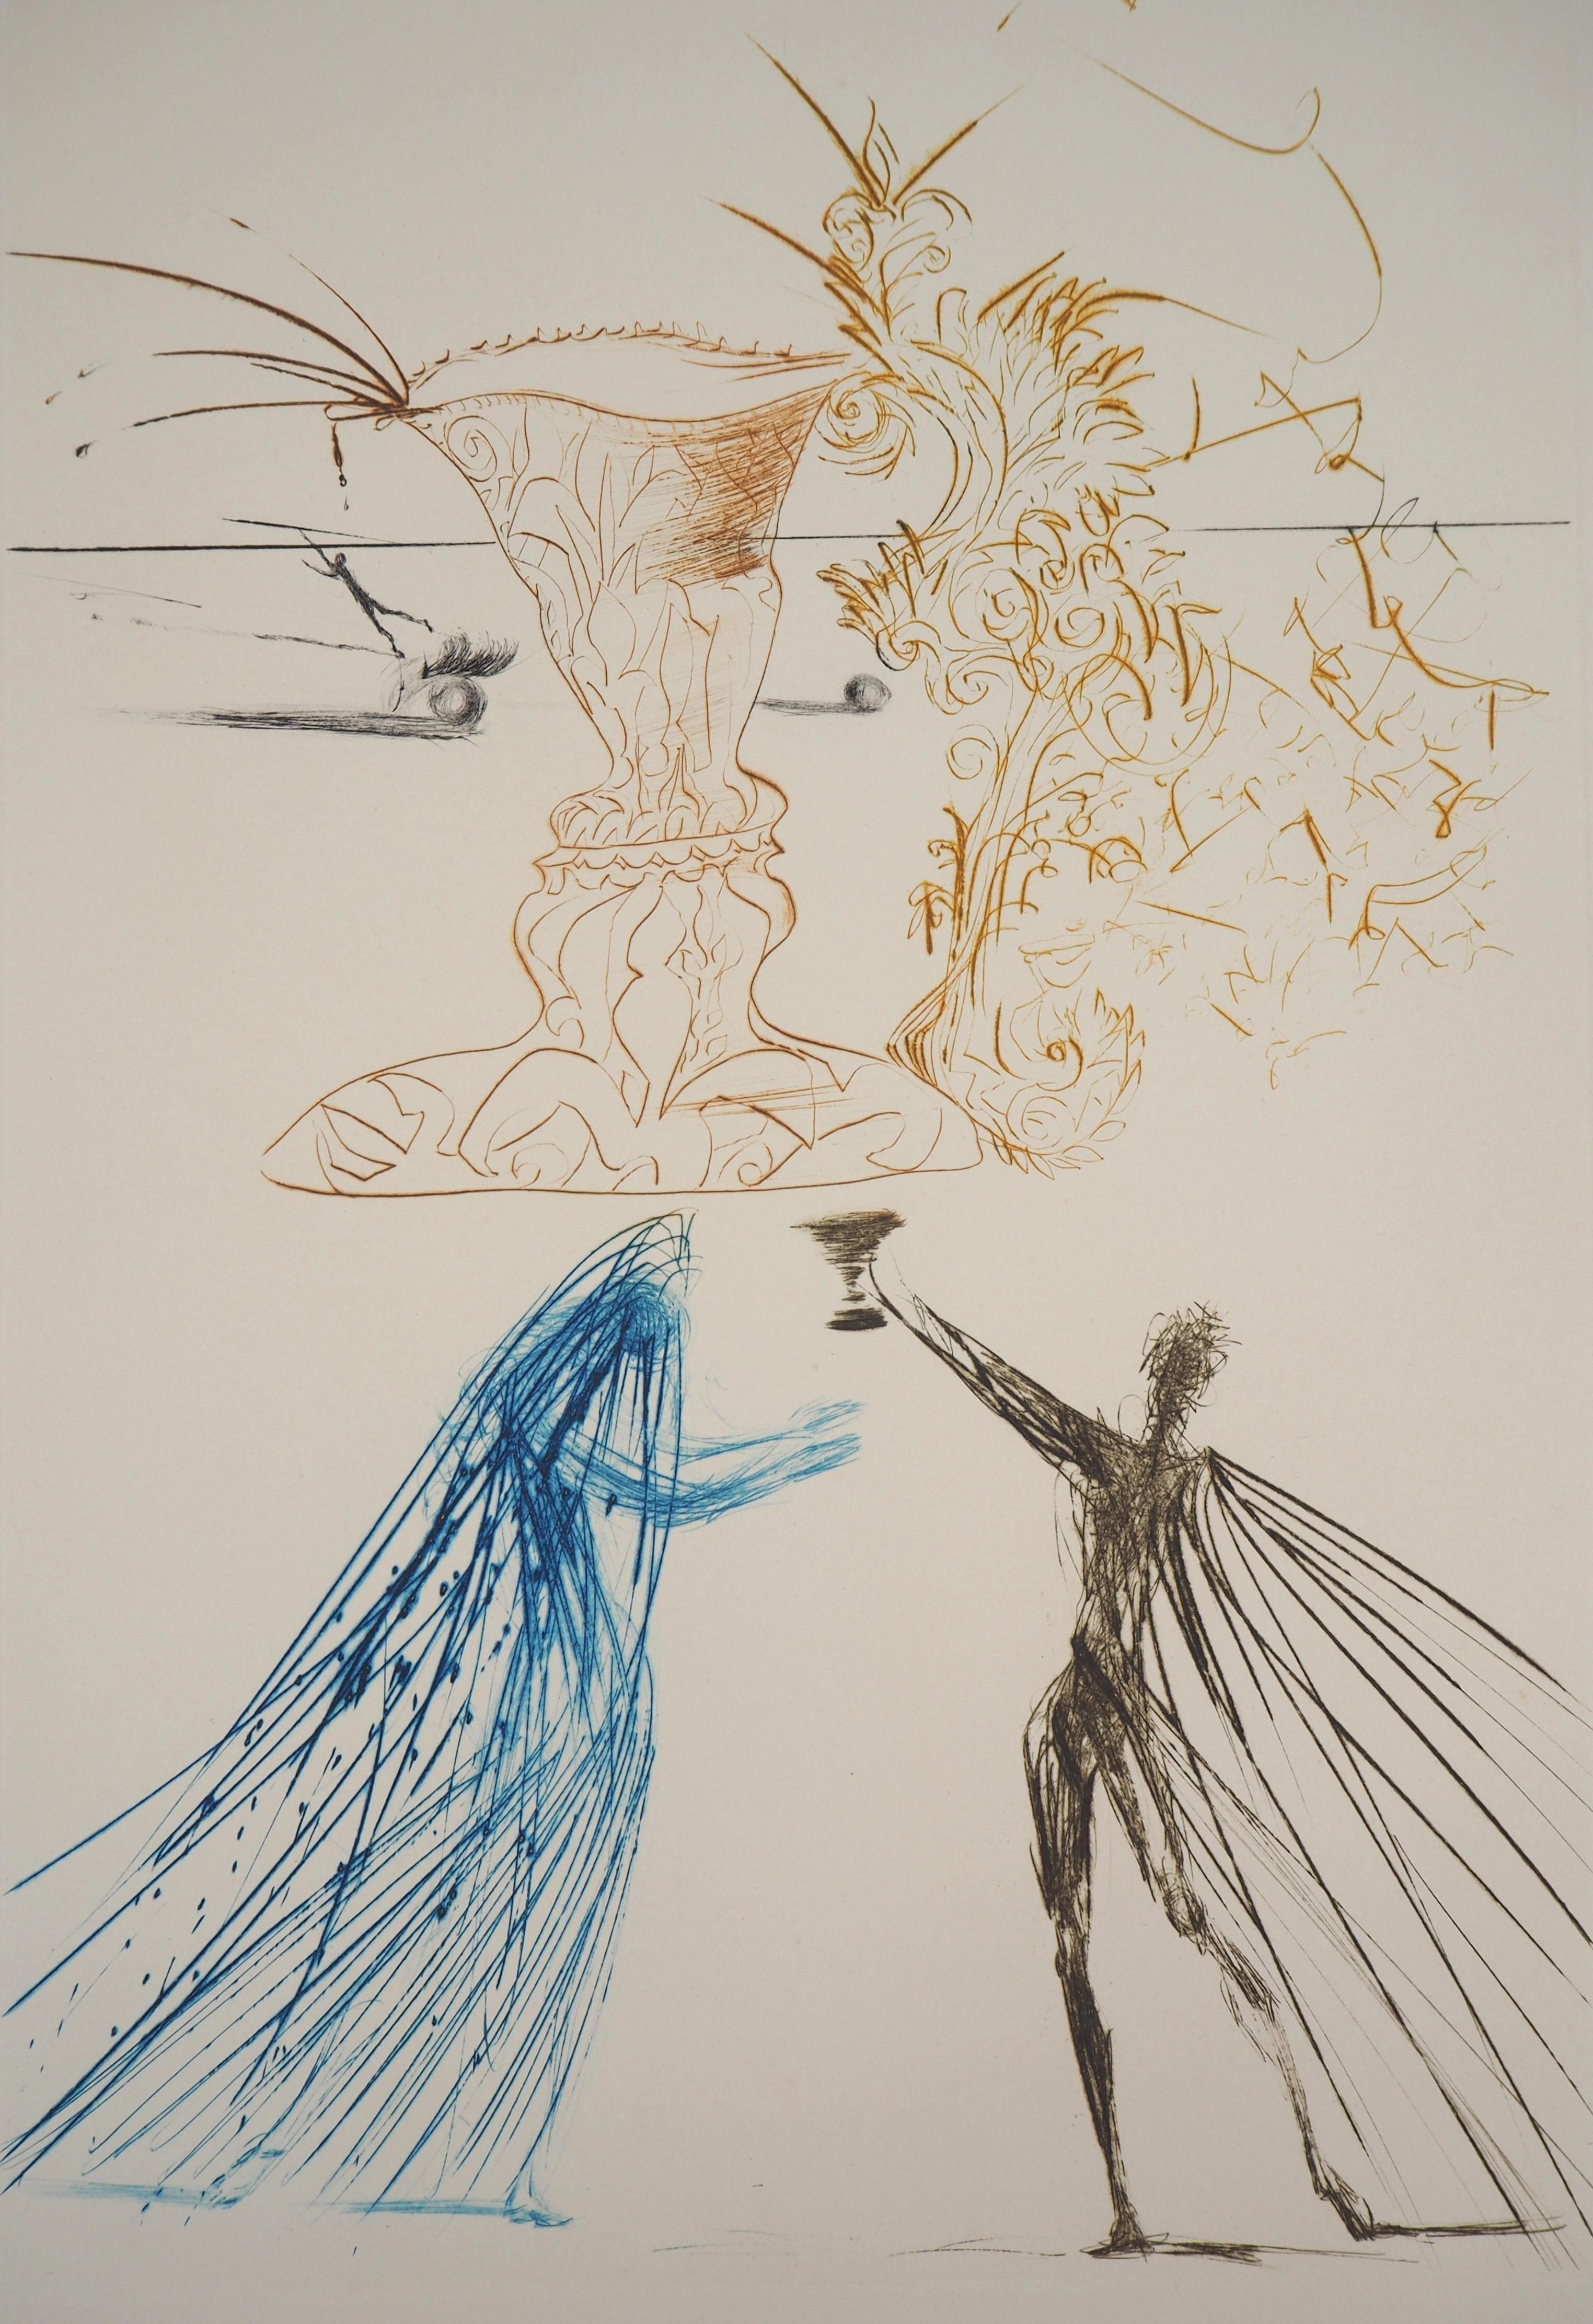 Salvador Dalí Figurative Print - Tristan and Iseult and Cup Faces, 1970 - Original Handsigned Etching 